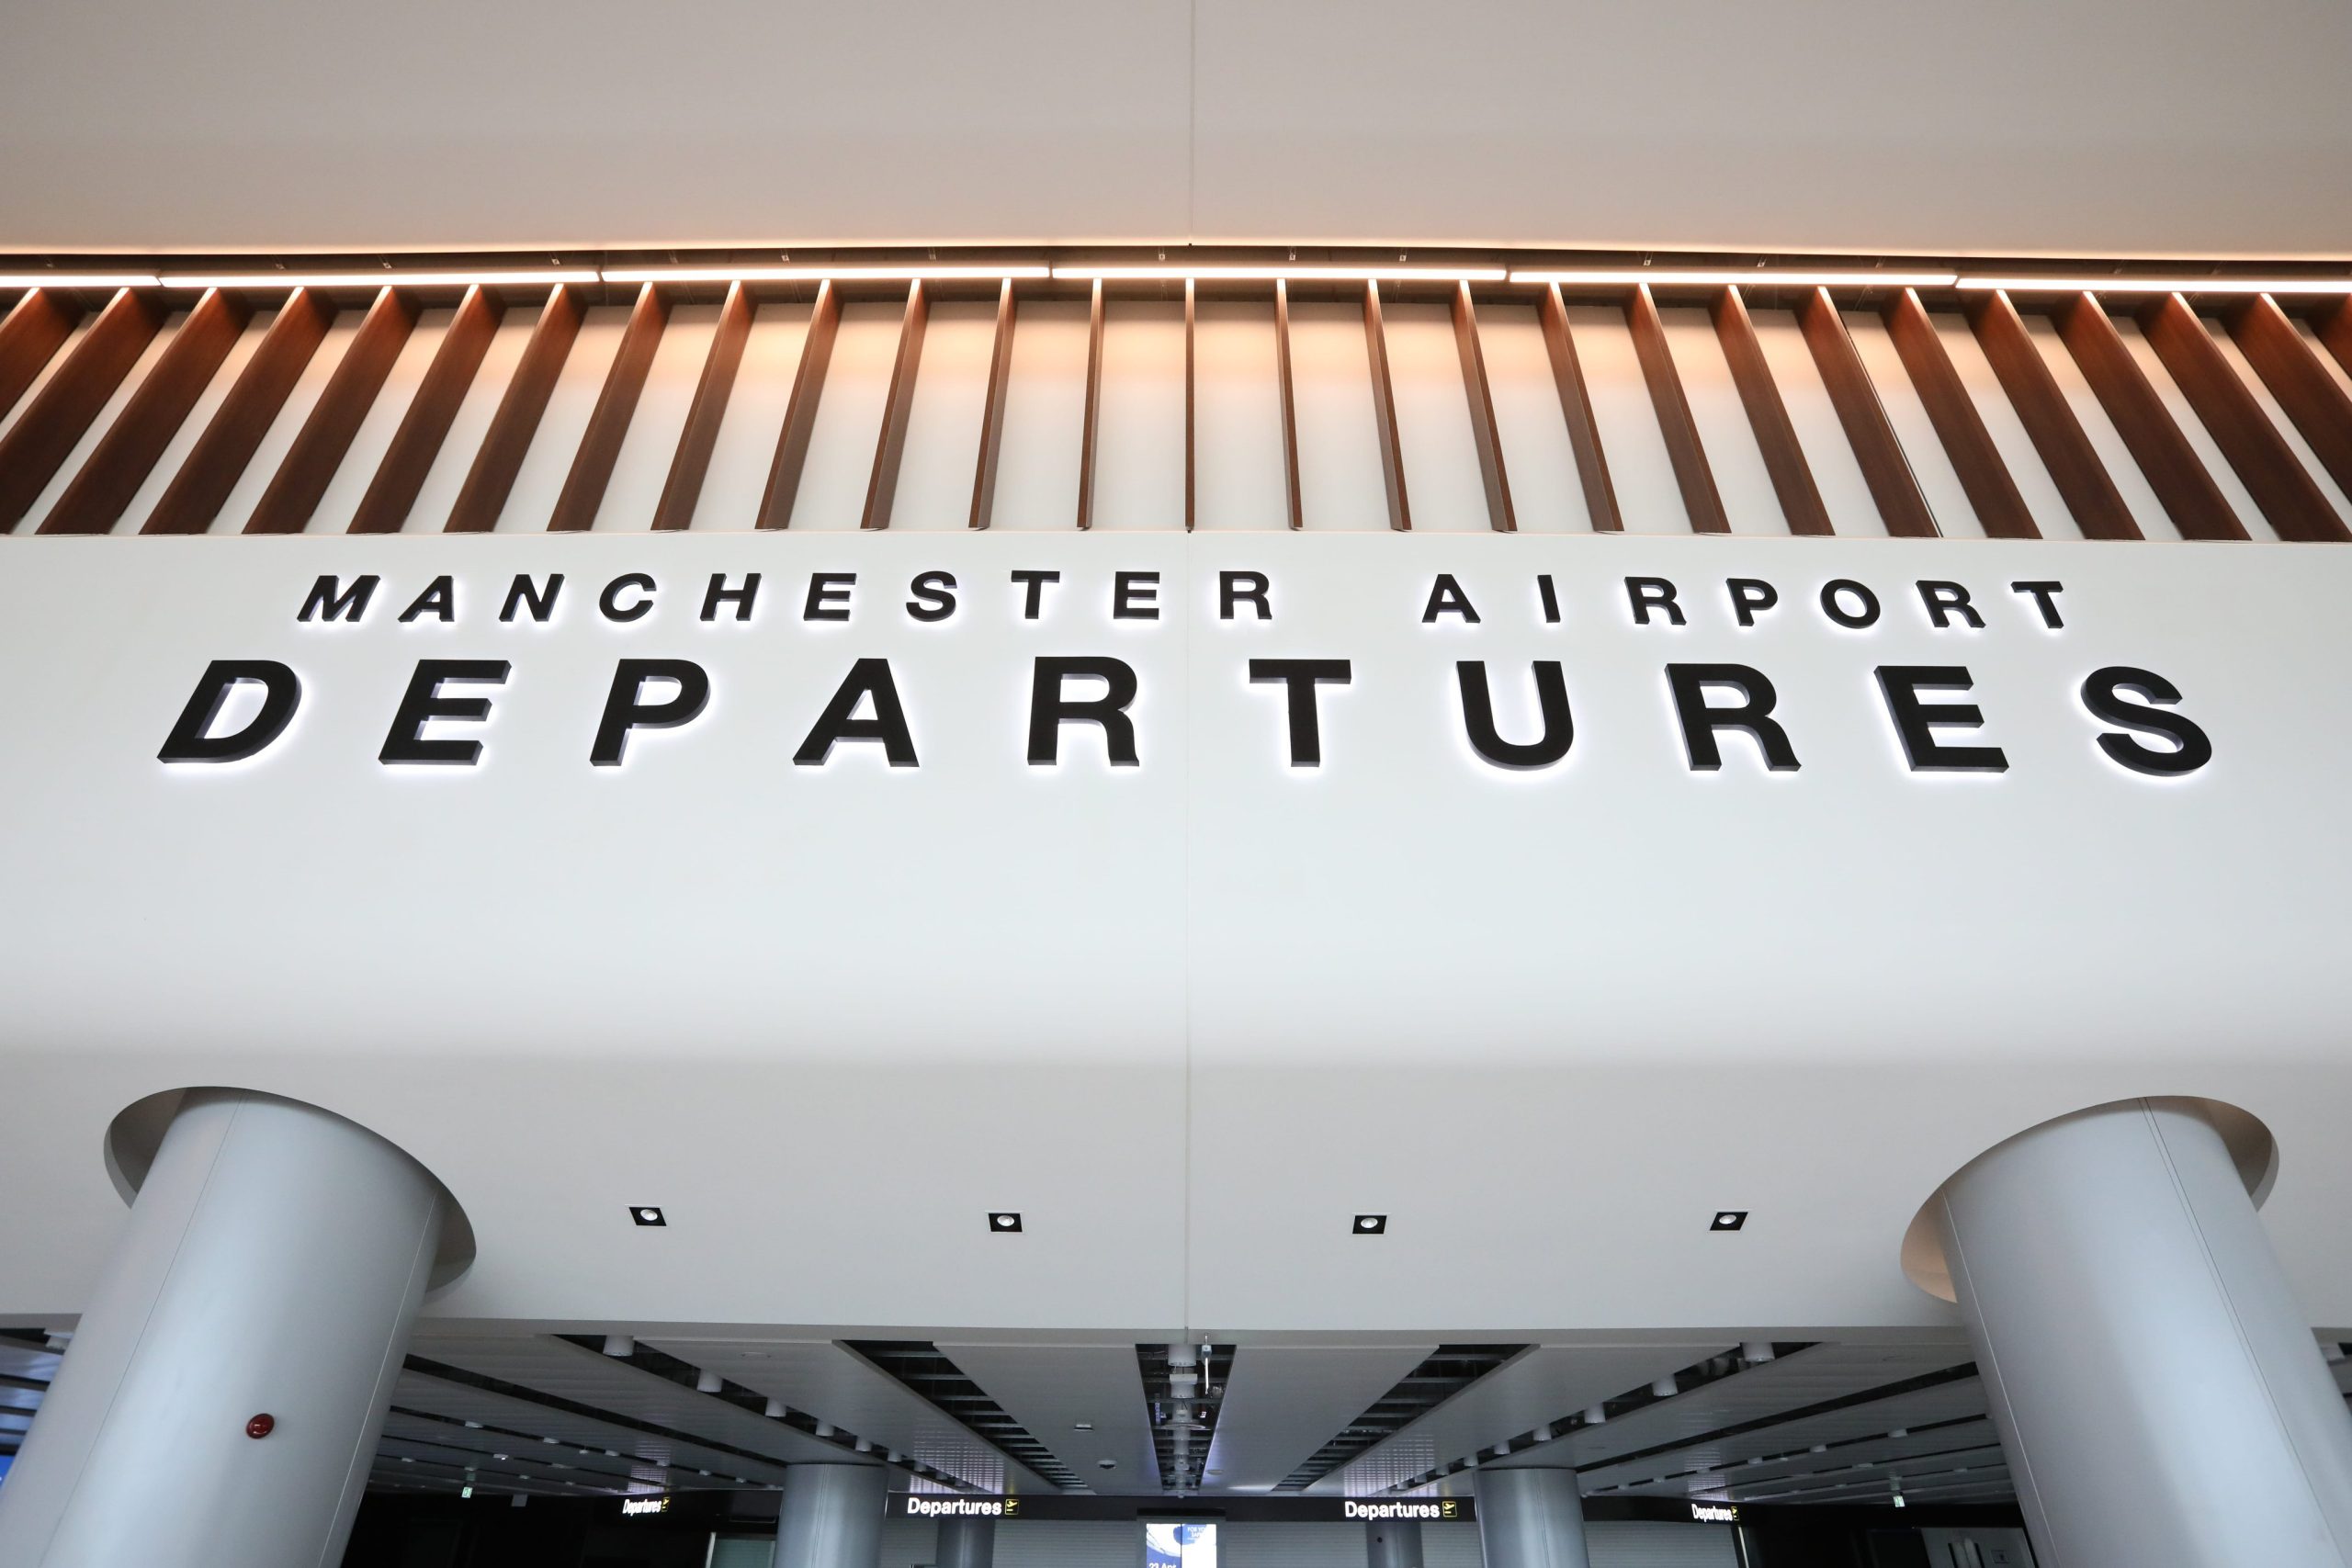 The Departures terminal at Manchester Airport